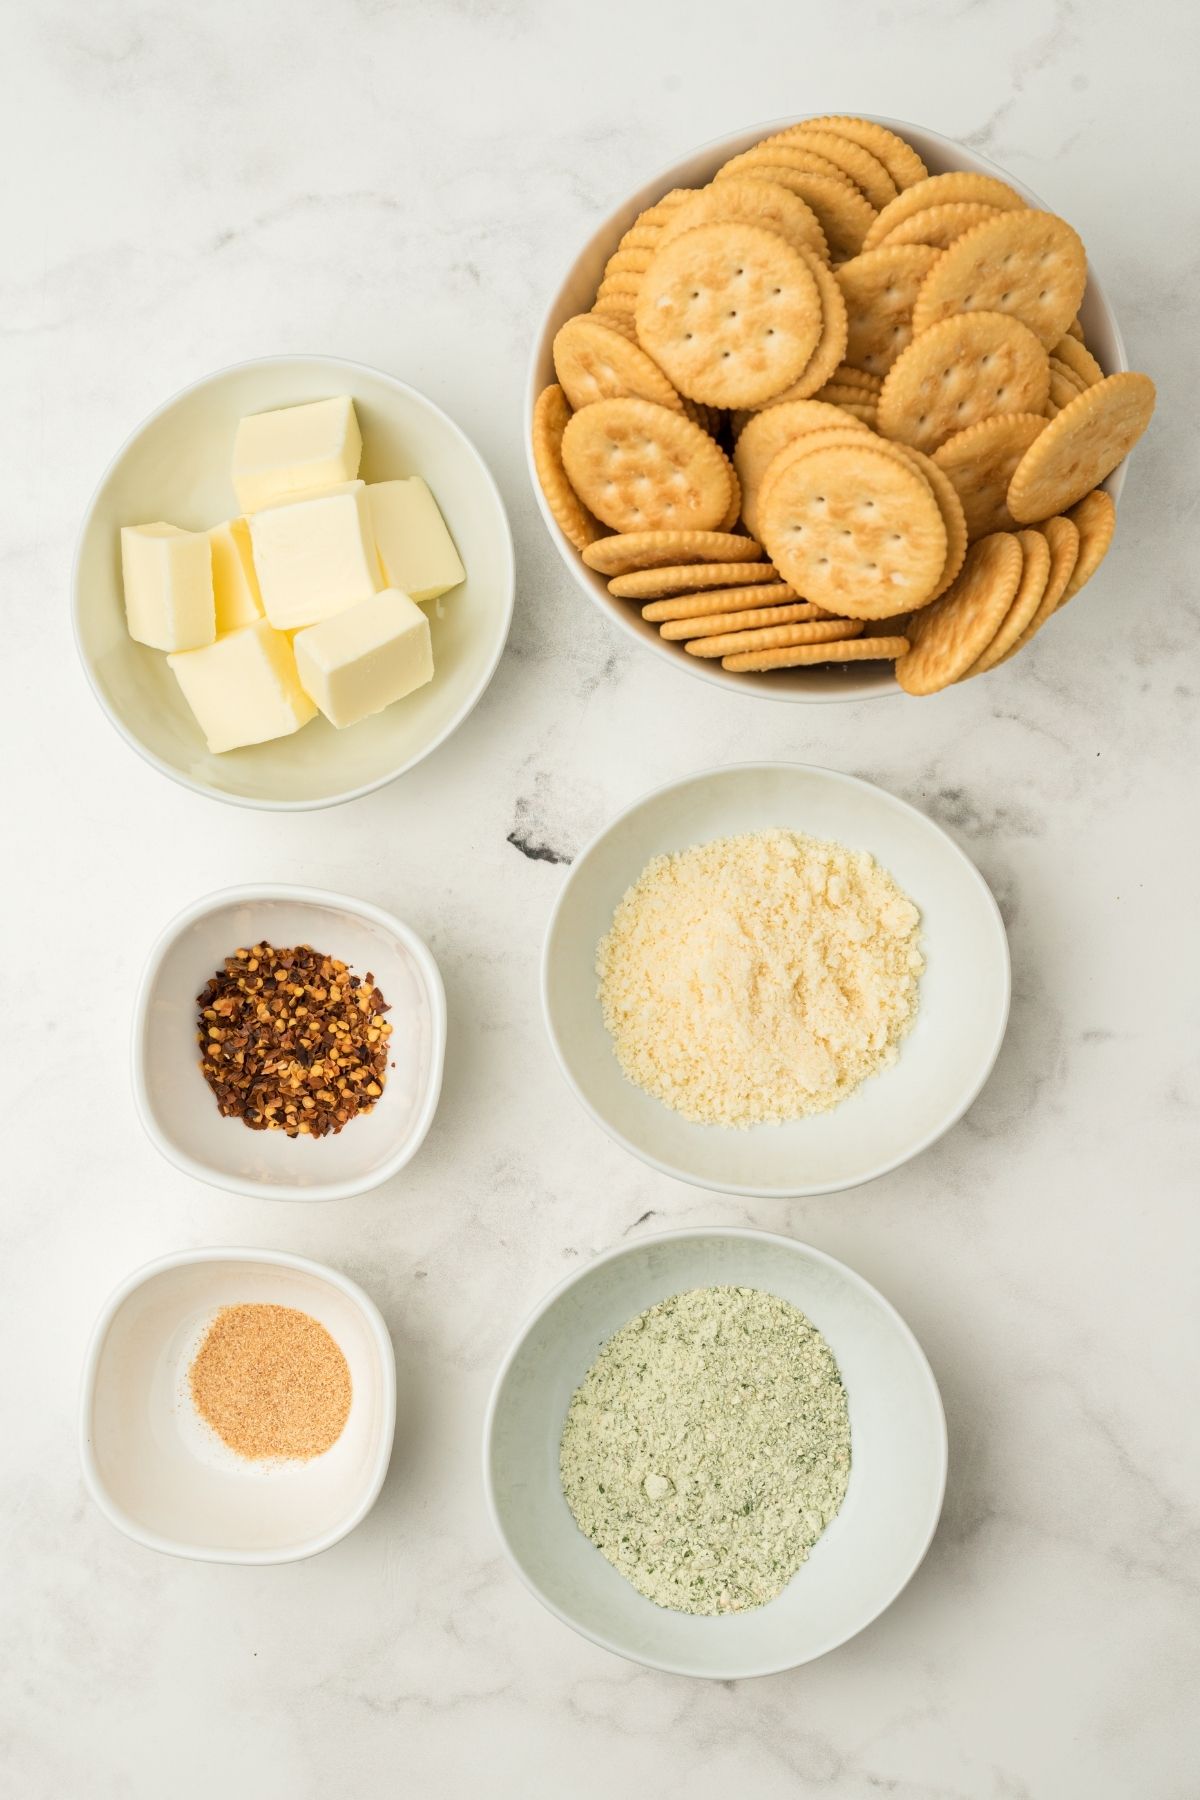 ingredients in bowls on white counter: butter, plain Ritz crackers, parmesan cheese, red pepper flakes, powdered ranch seasoning, garlic powder